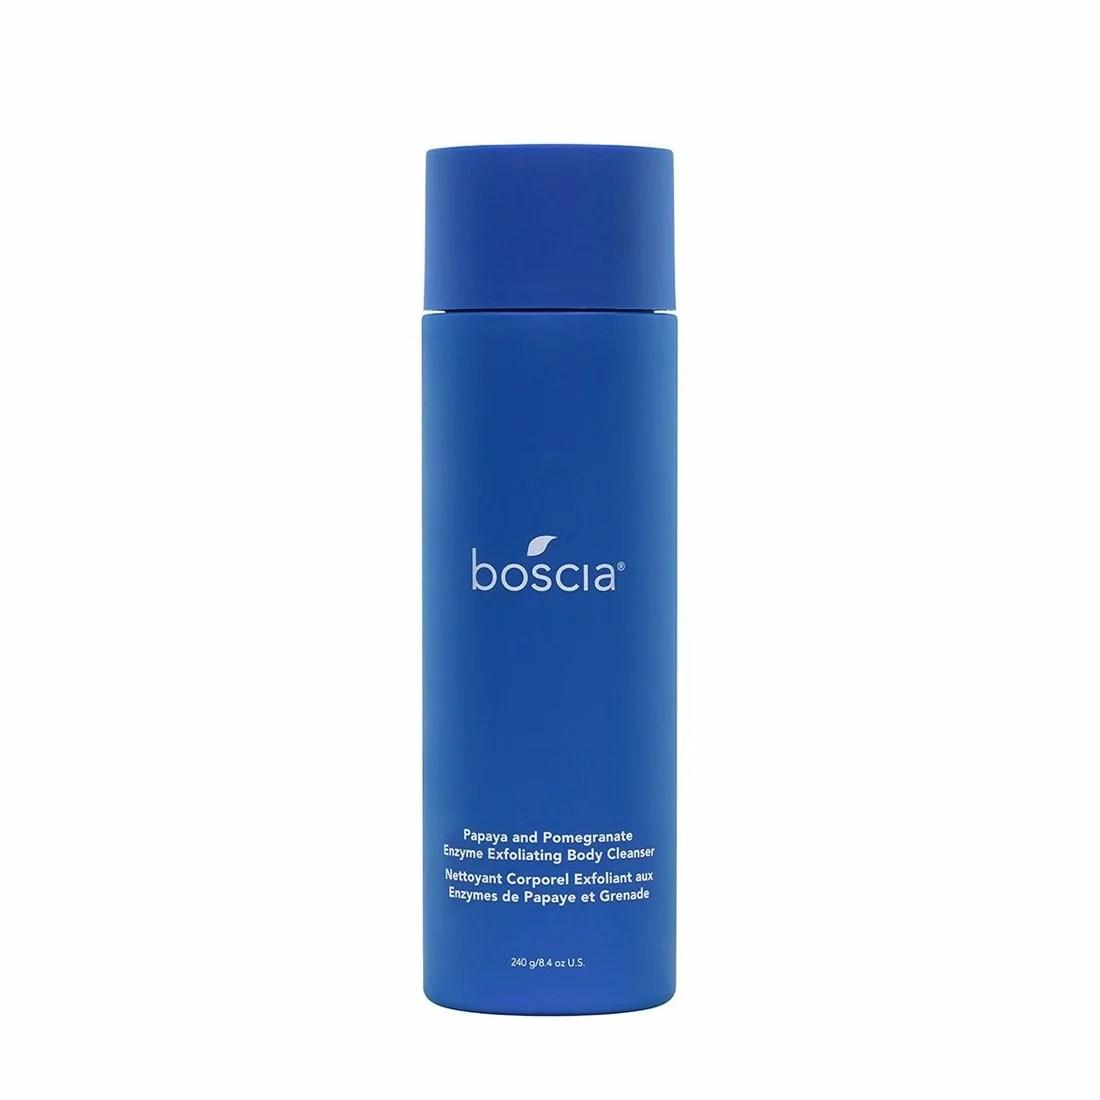 Boscia Papaya and Pomegranate Enzyme Exfoliating Body Cleanser, body-care routine